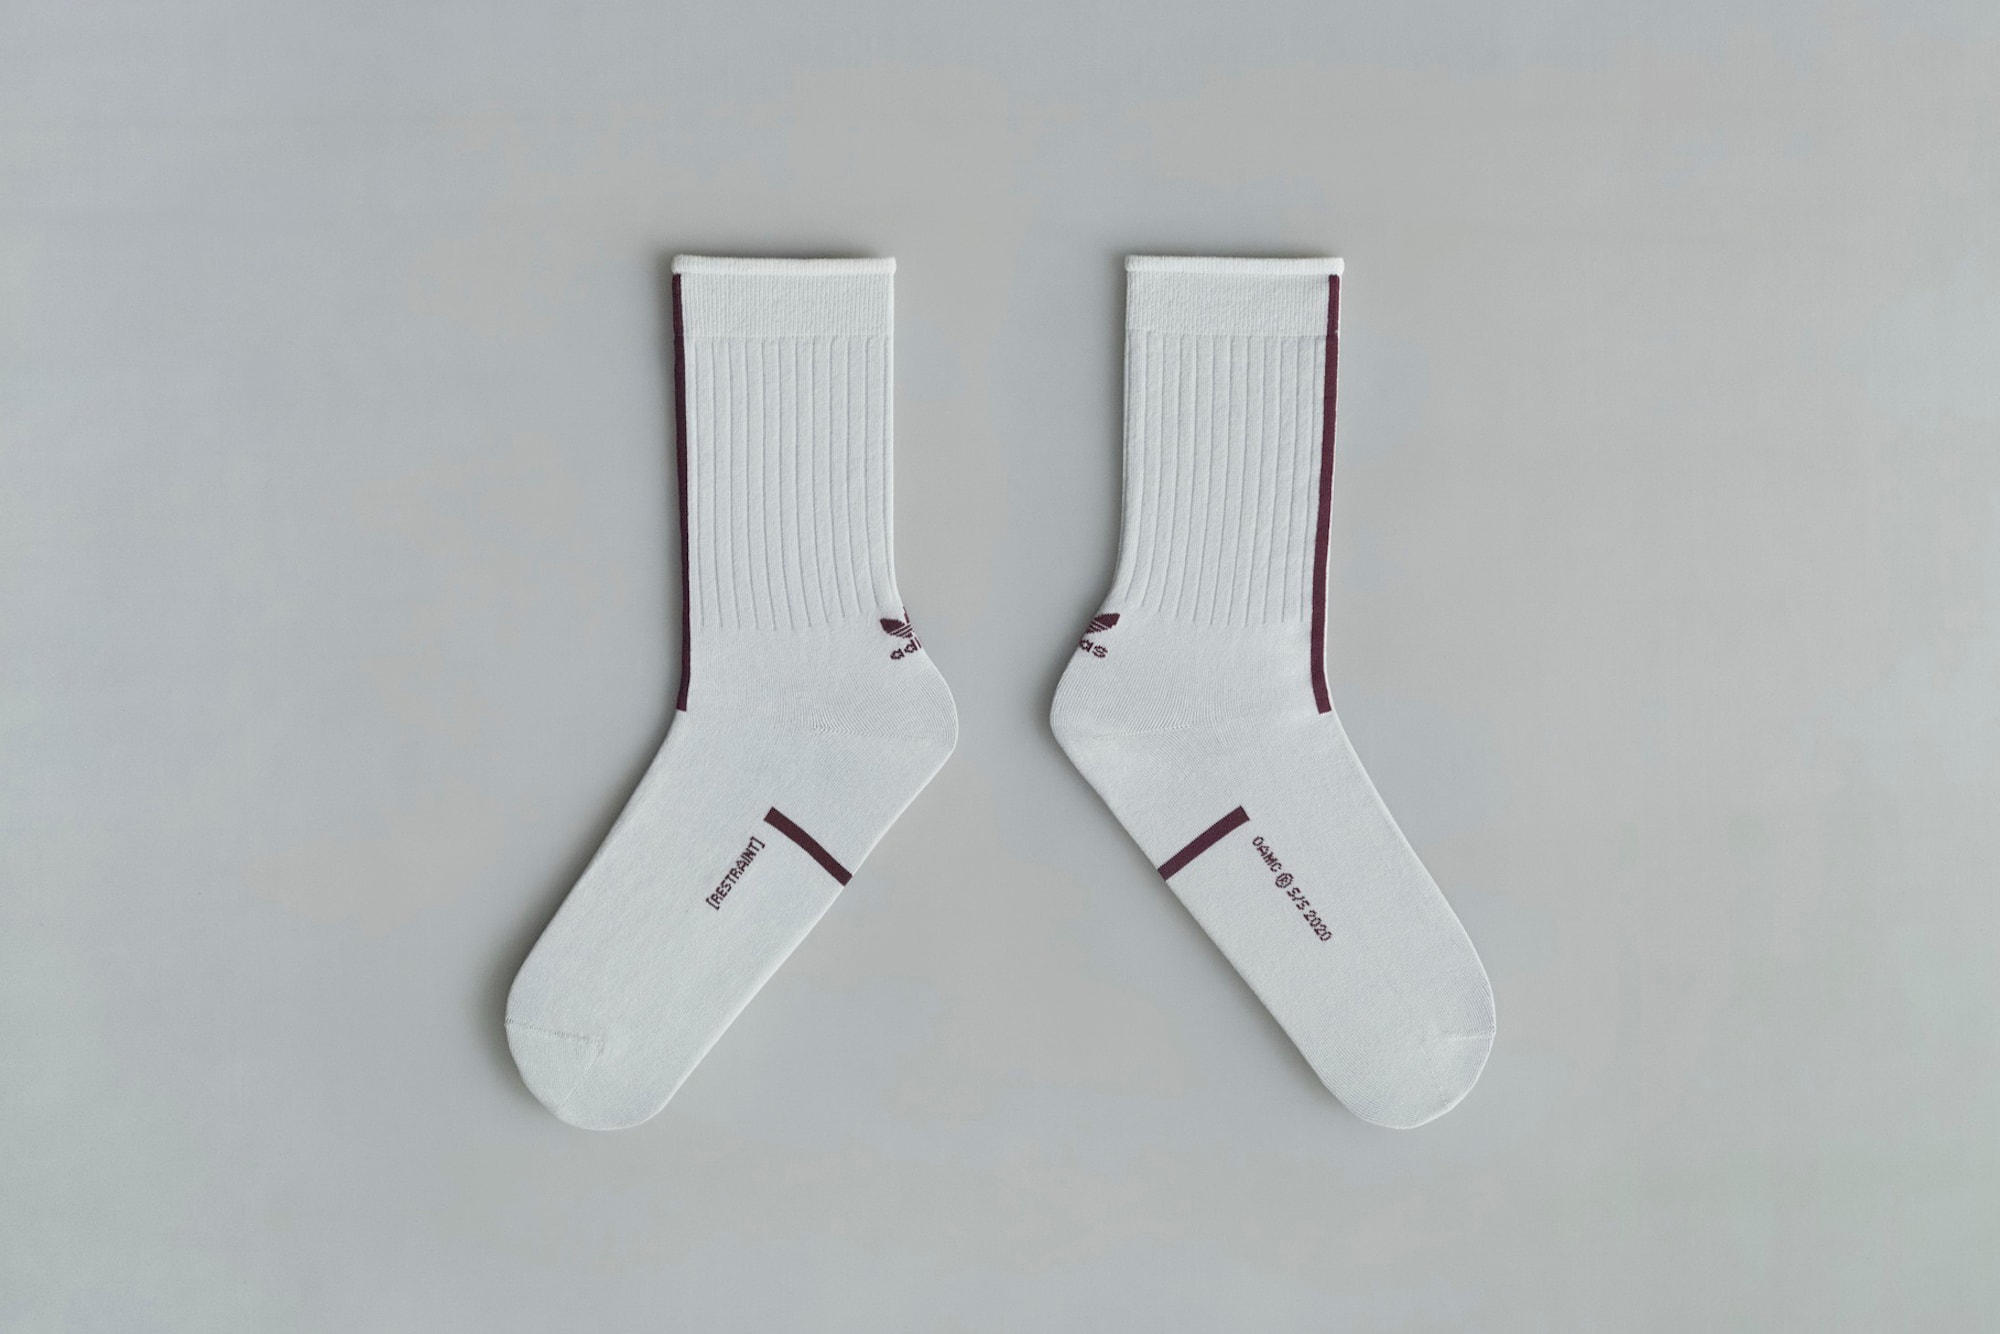 OAMC x adidas Originals Type O-4 O-5 Sneaker Release Socks Exclusive Launch Trainer